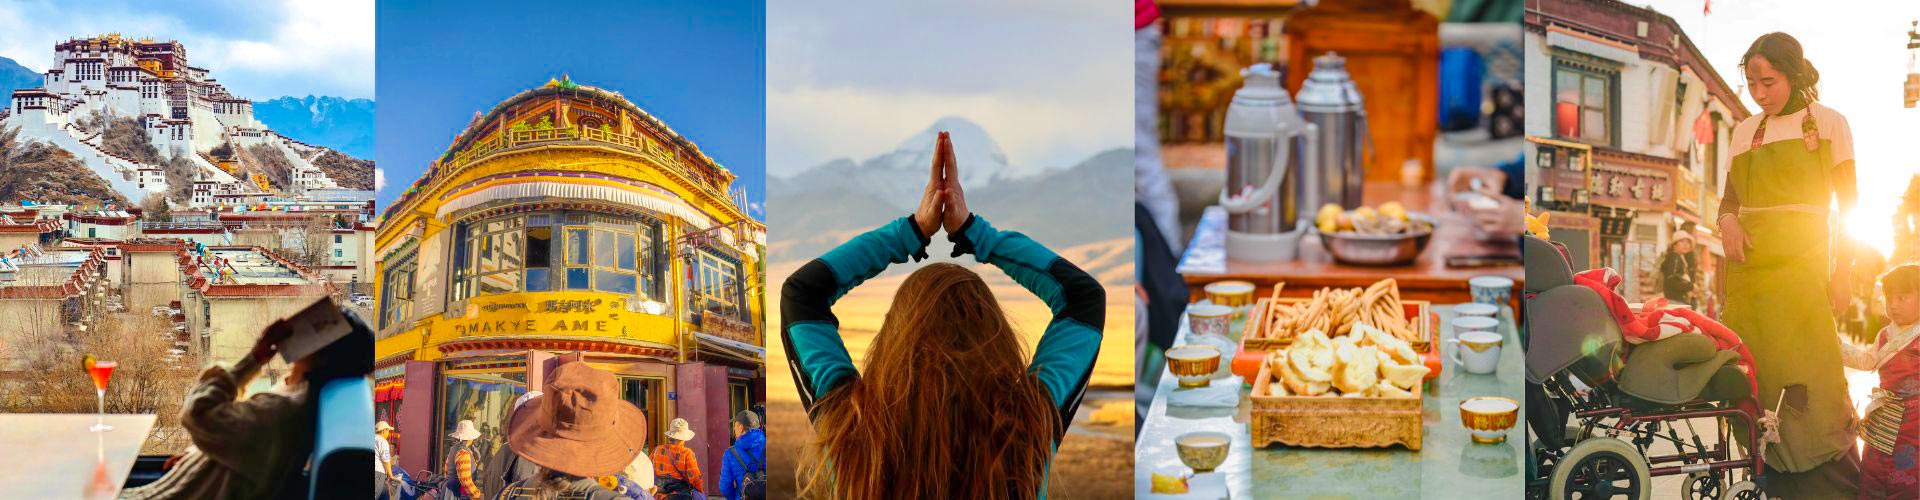 Tibet Winter Tours - Tibet Winter Vacation at LOWEST PRICE